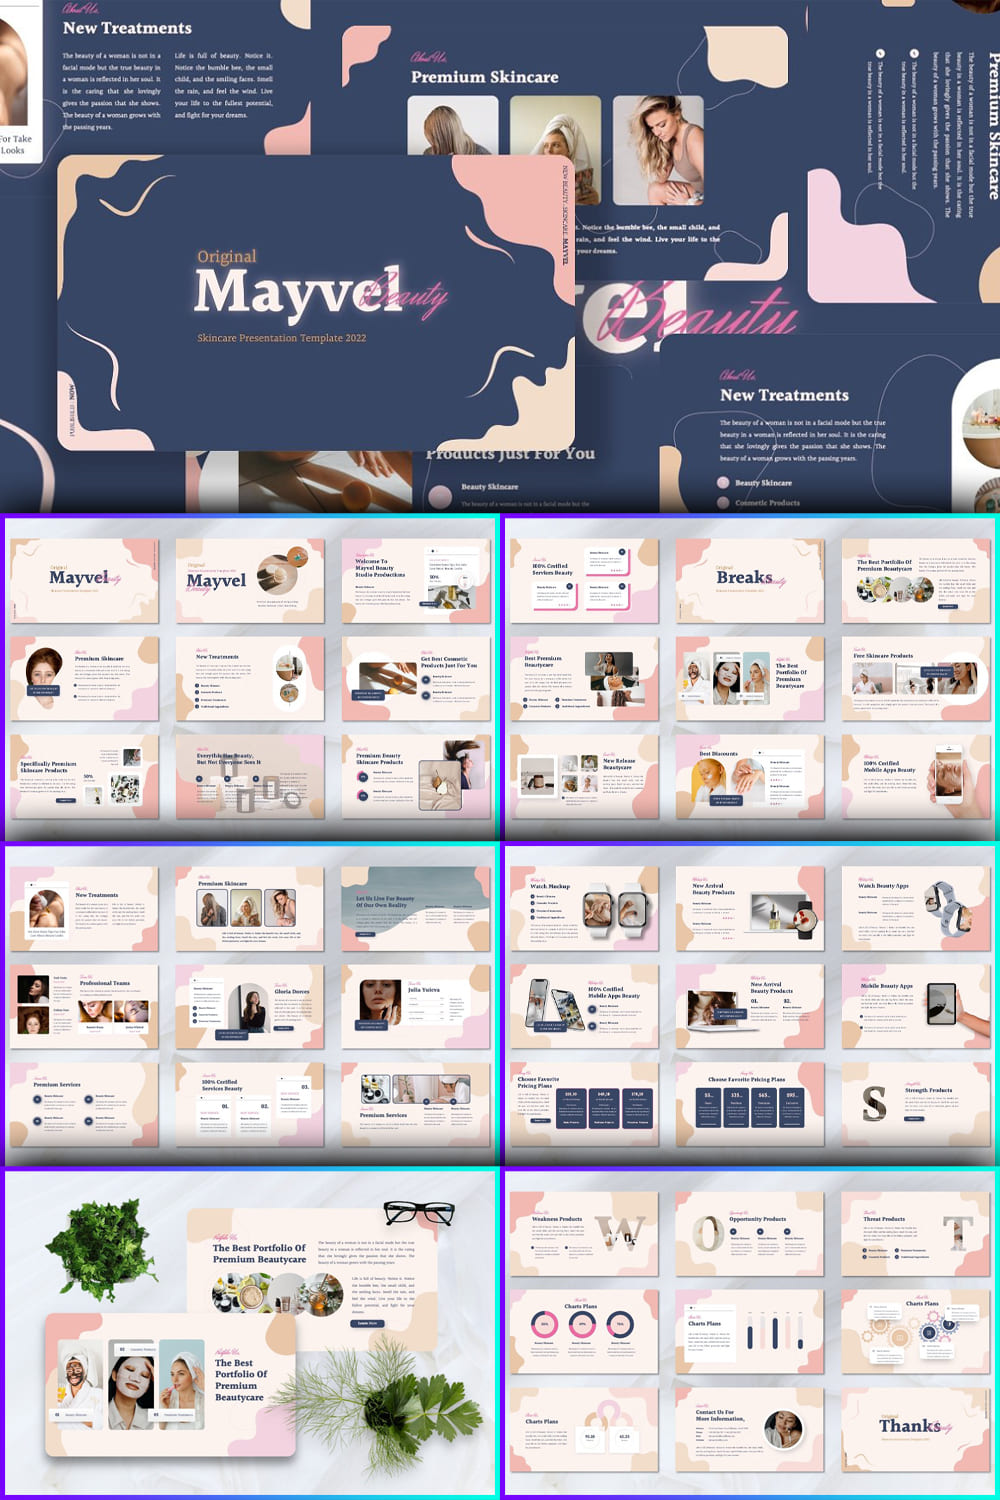 Preview Original Mayvel beauty skincare presentation template on the gadgets.